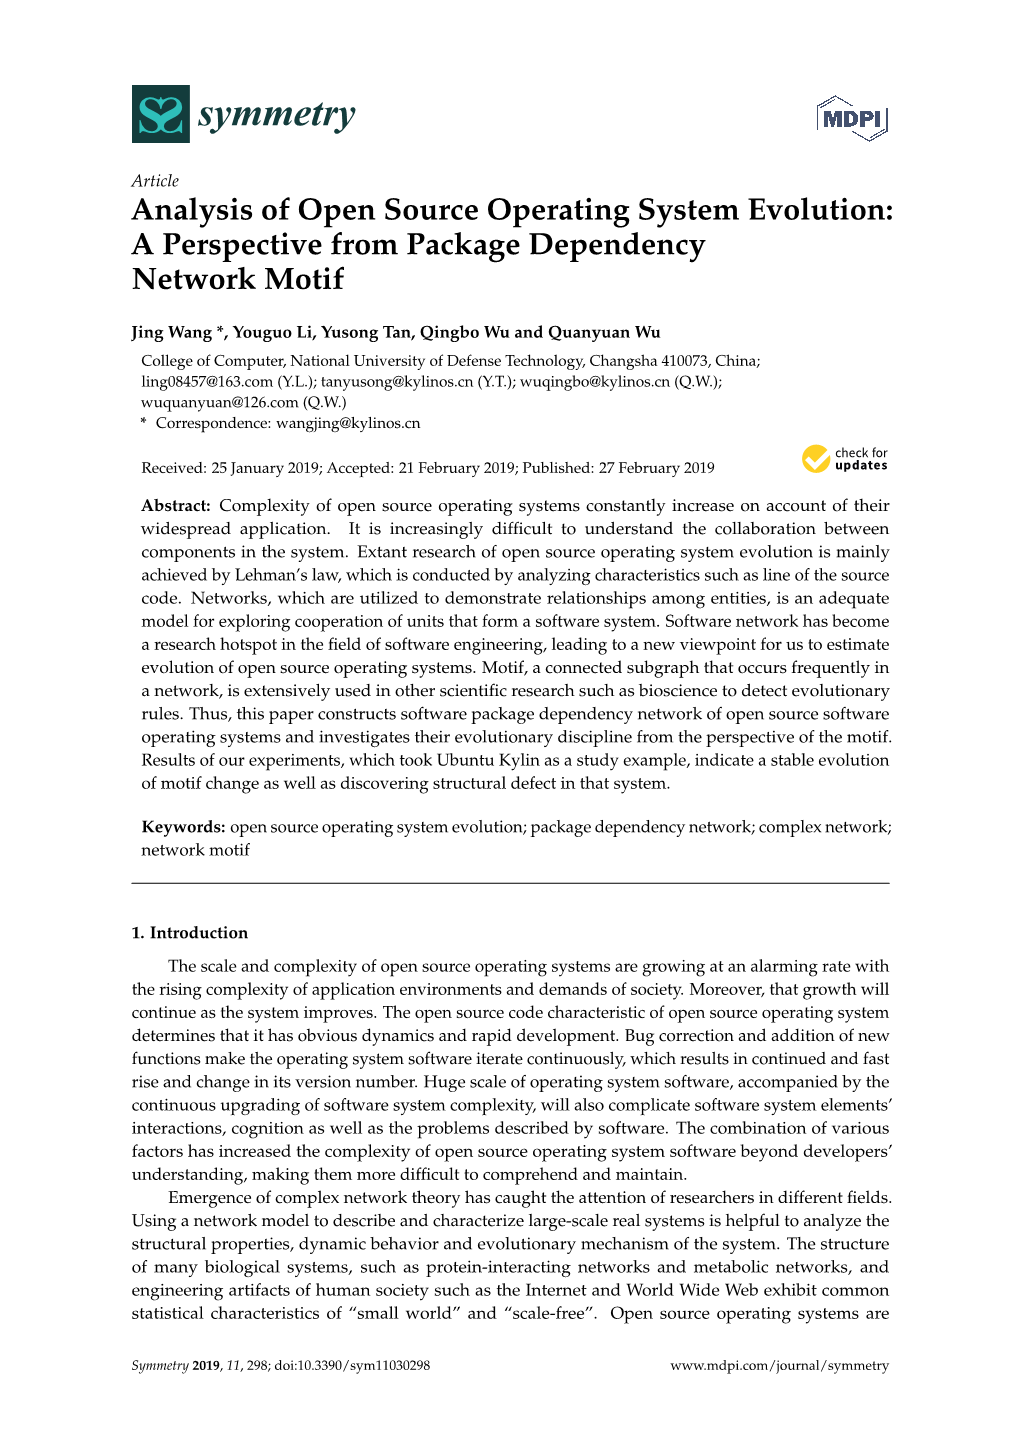 A Perspective from Package Dependency Network Motif